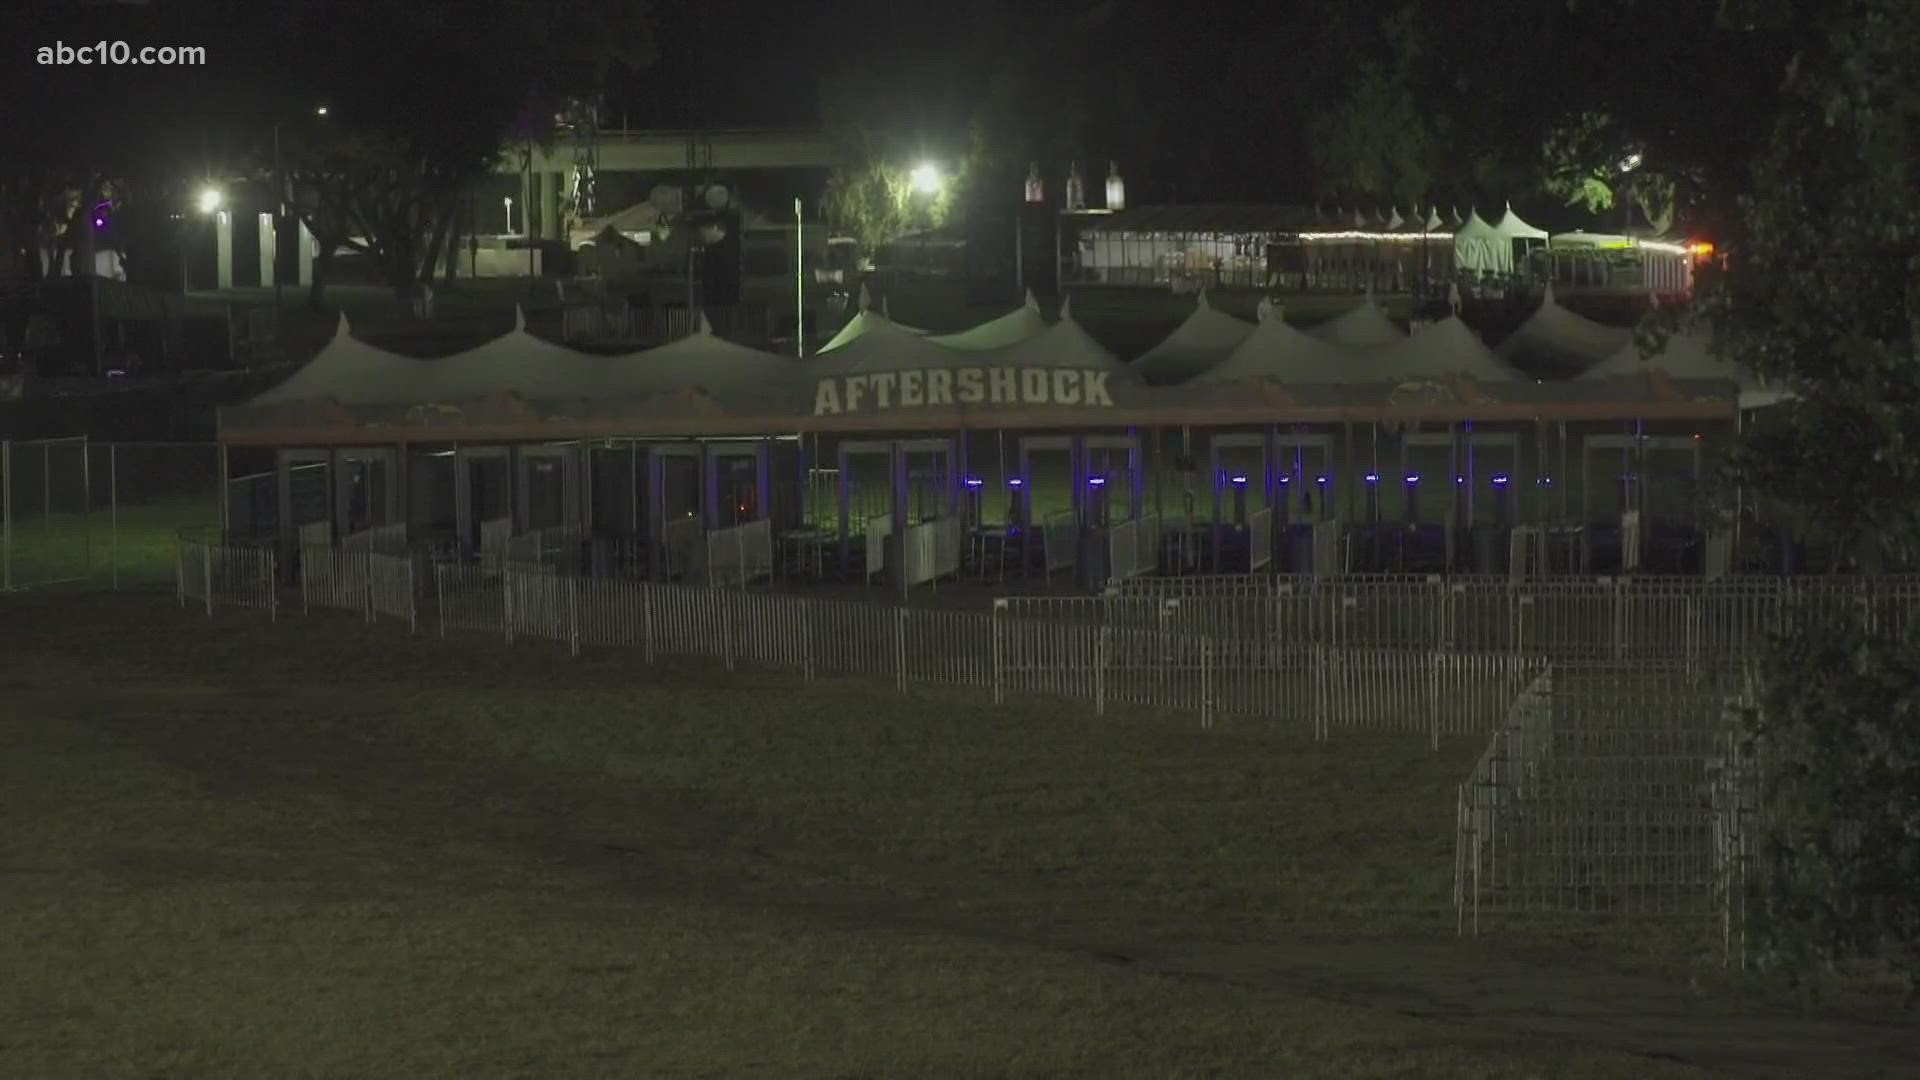 Aftershock organizers expect the event to draw more than 150,000 fans making it the largest music event in Sacramento since the pandemic began.